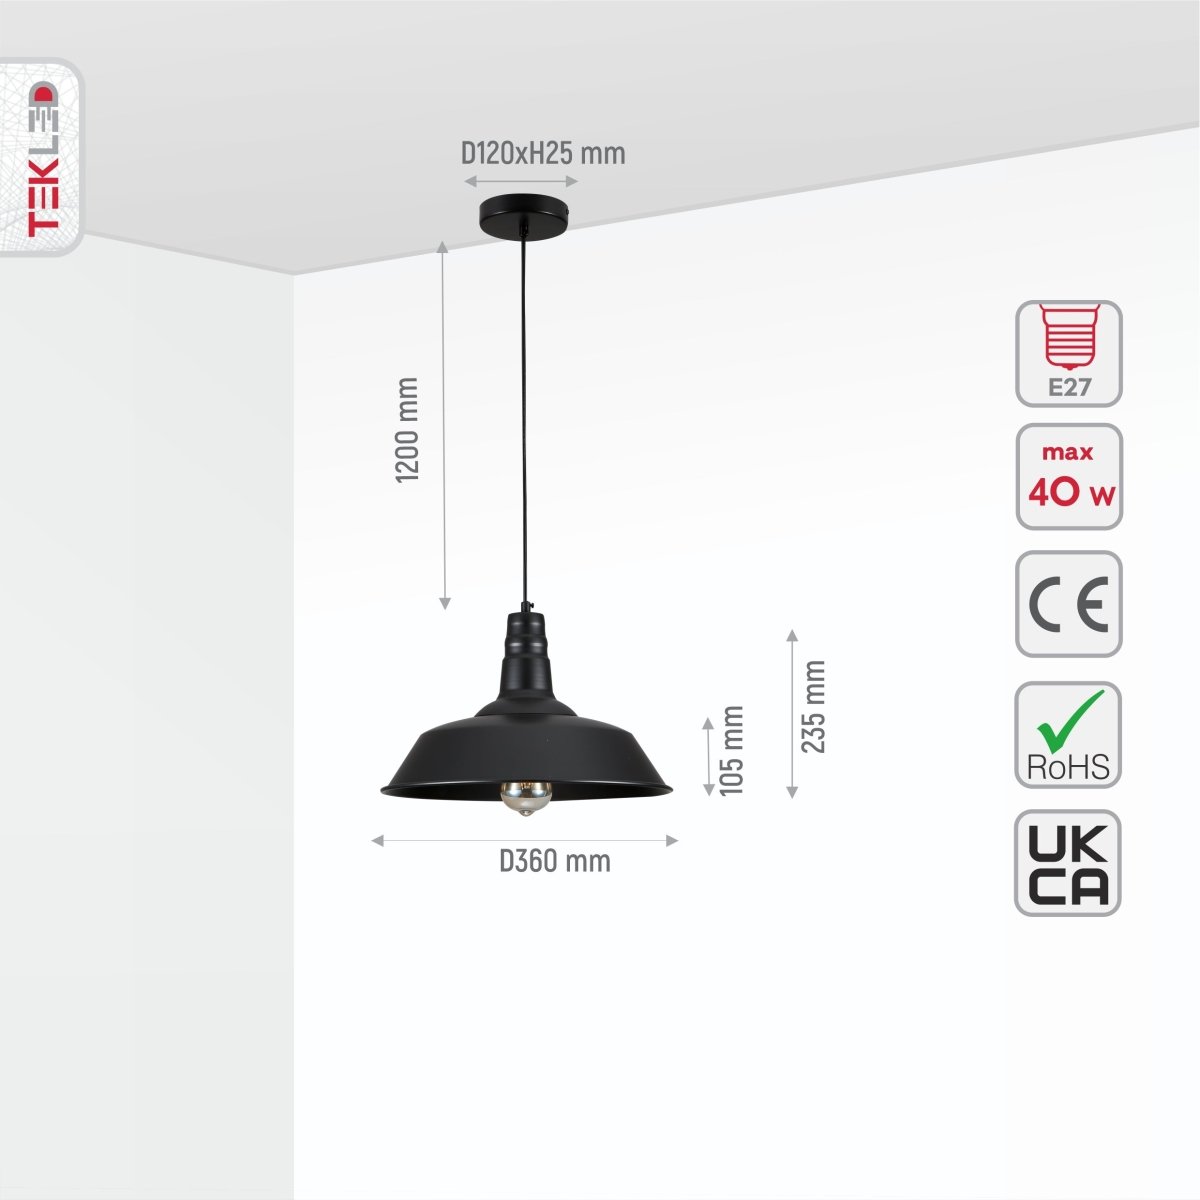 Size and specs of Black Step Industrial Metal Ceiling Pendant Light with E27 Fitting | TEKLED 150-18358